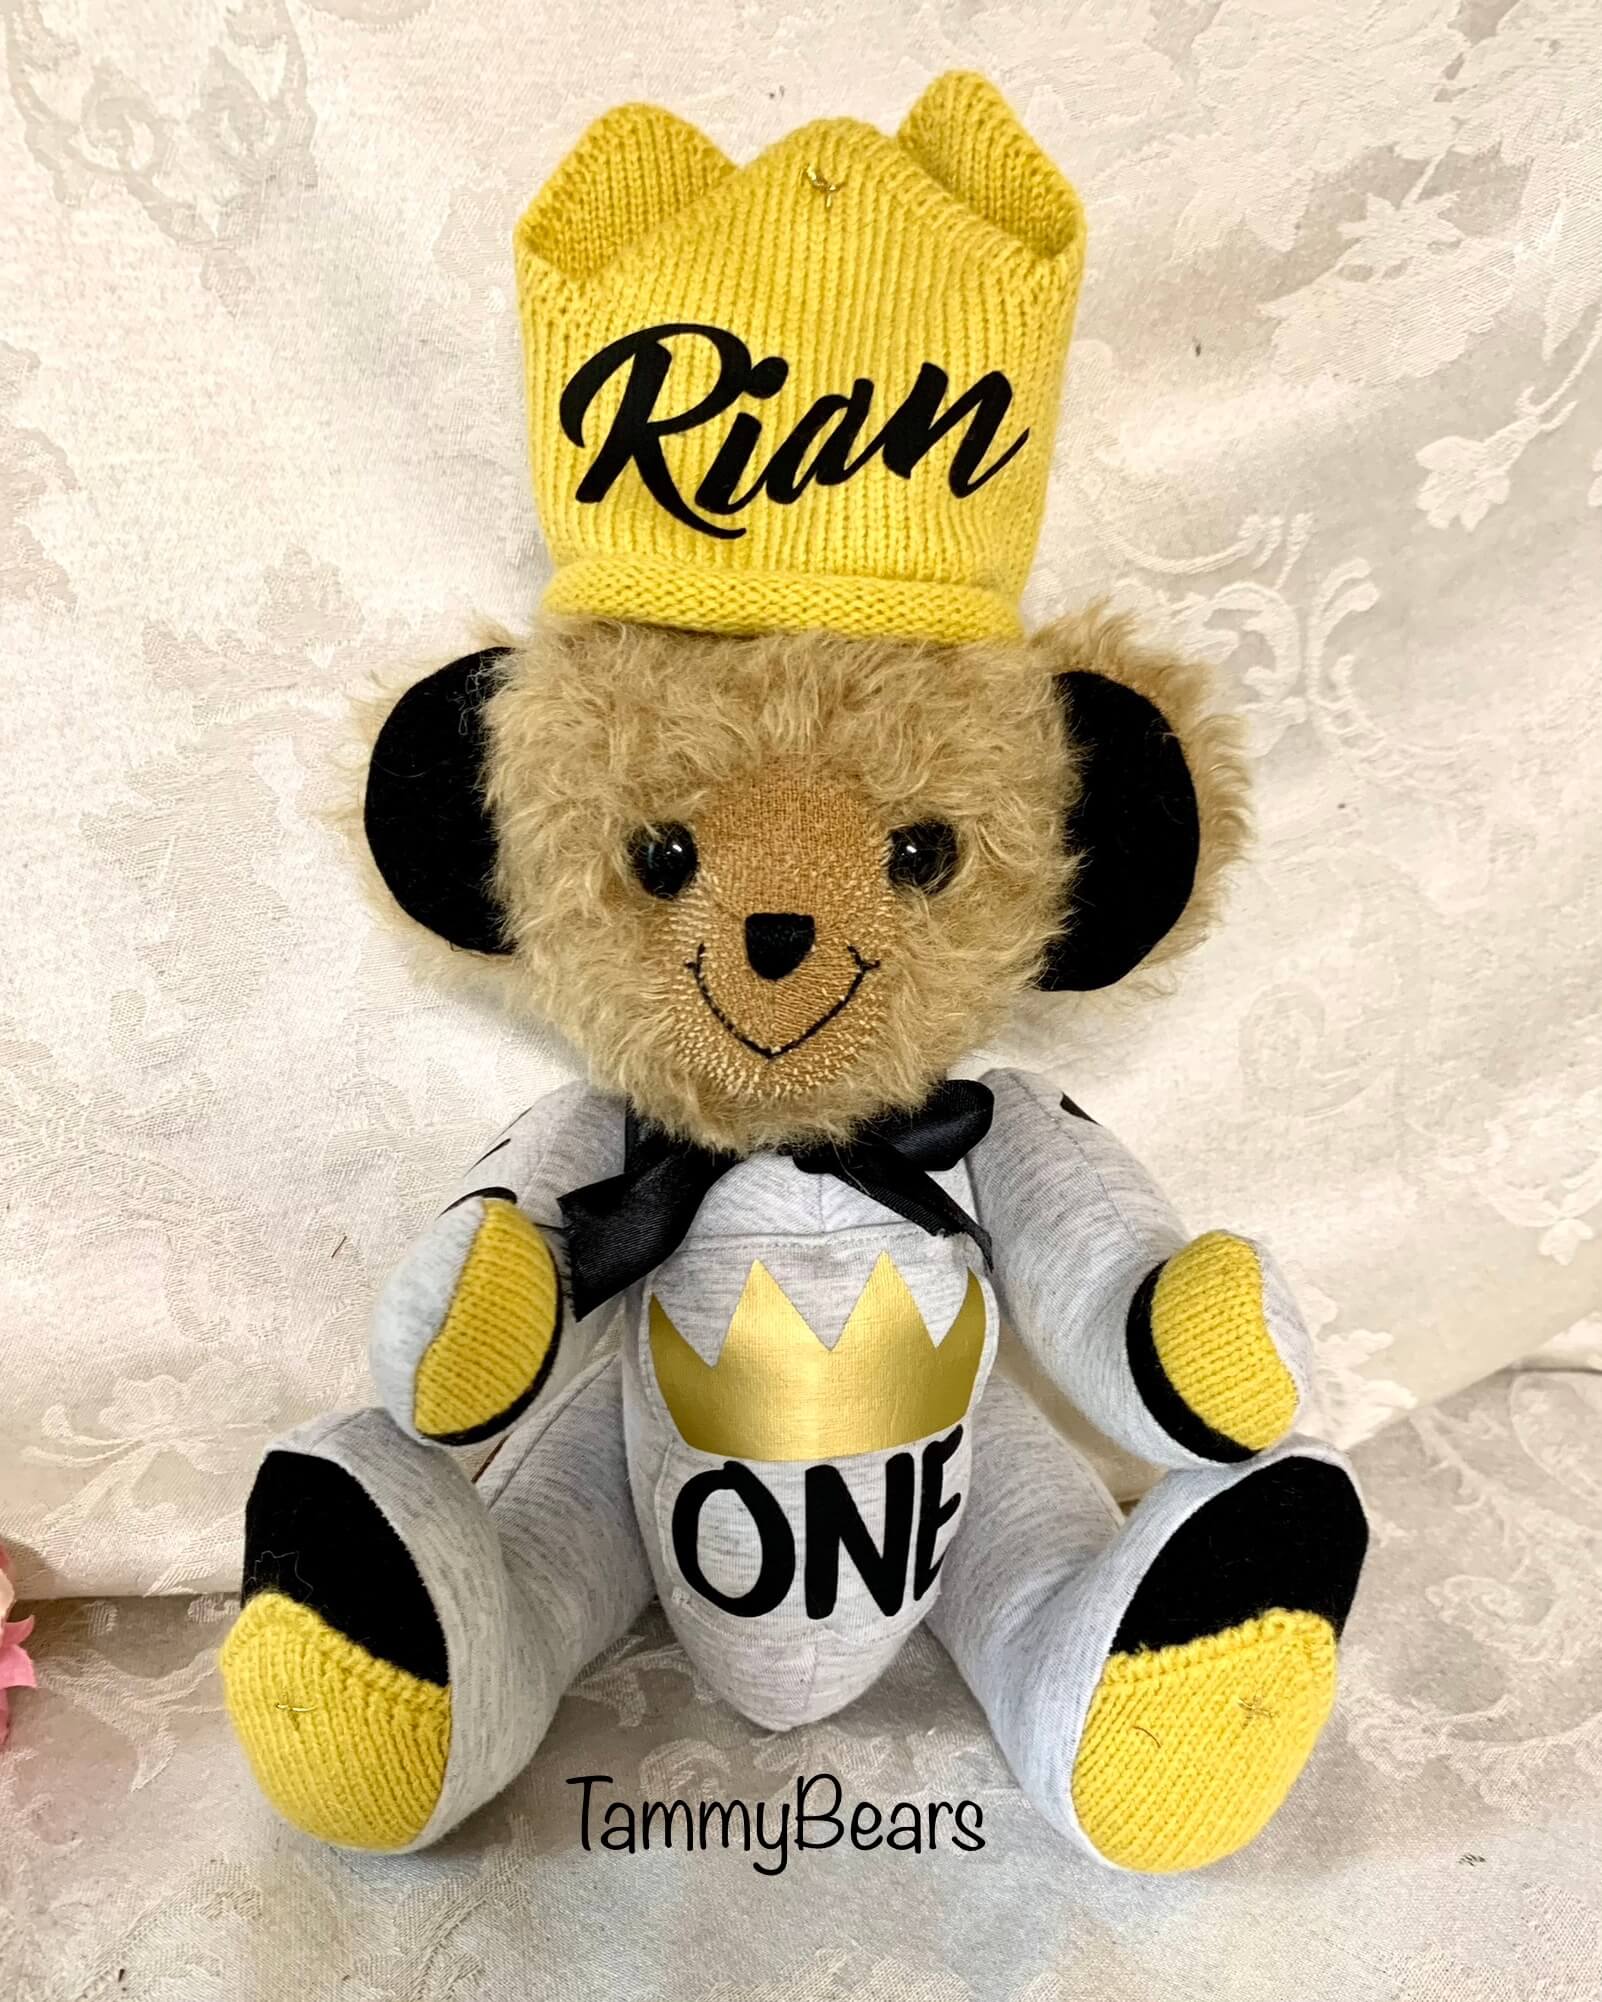 Part plush teddy bear made from baby gray and gold clothing.